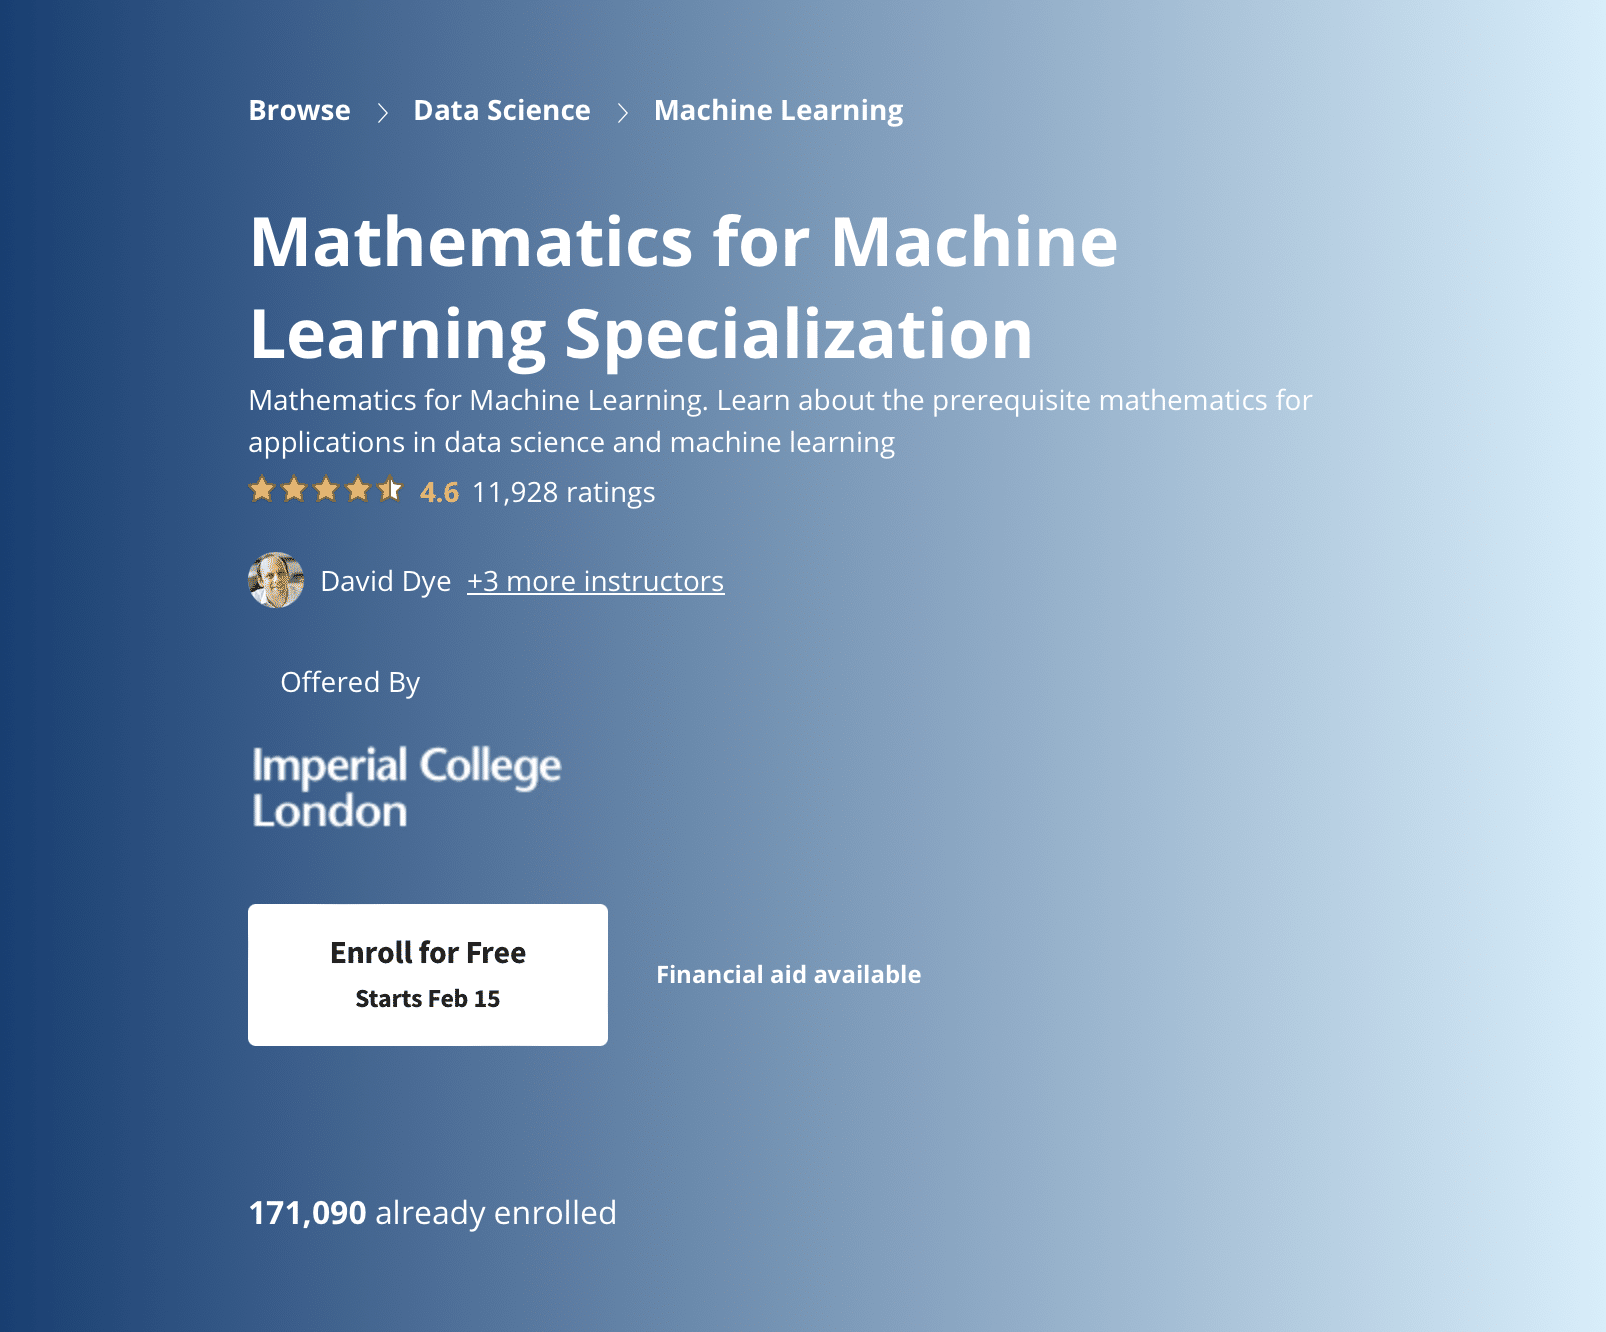 Mathematics for Machine Learning Specialization